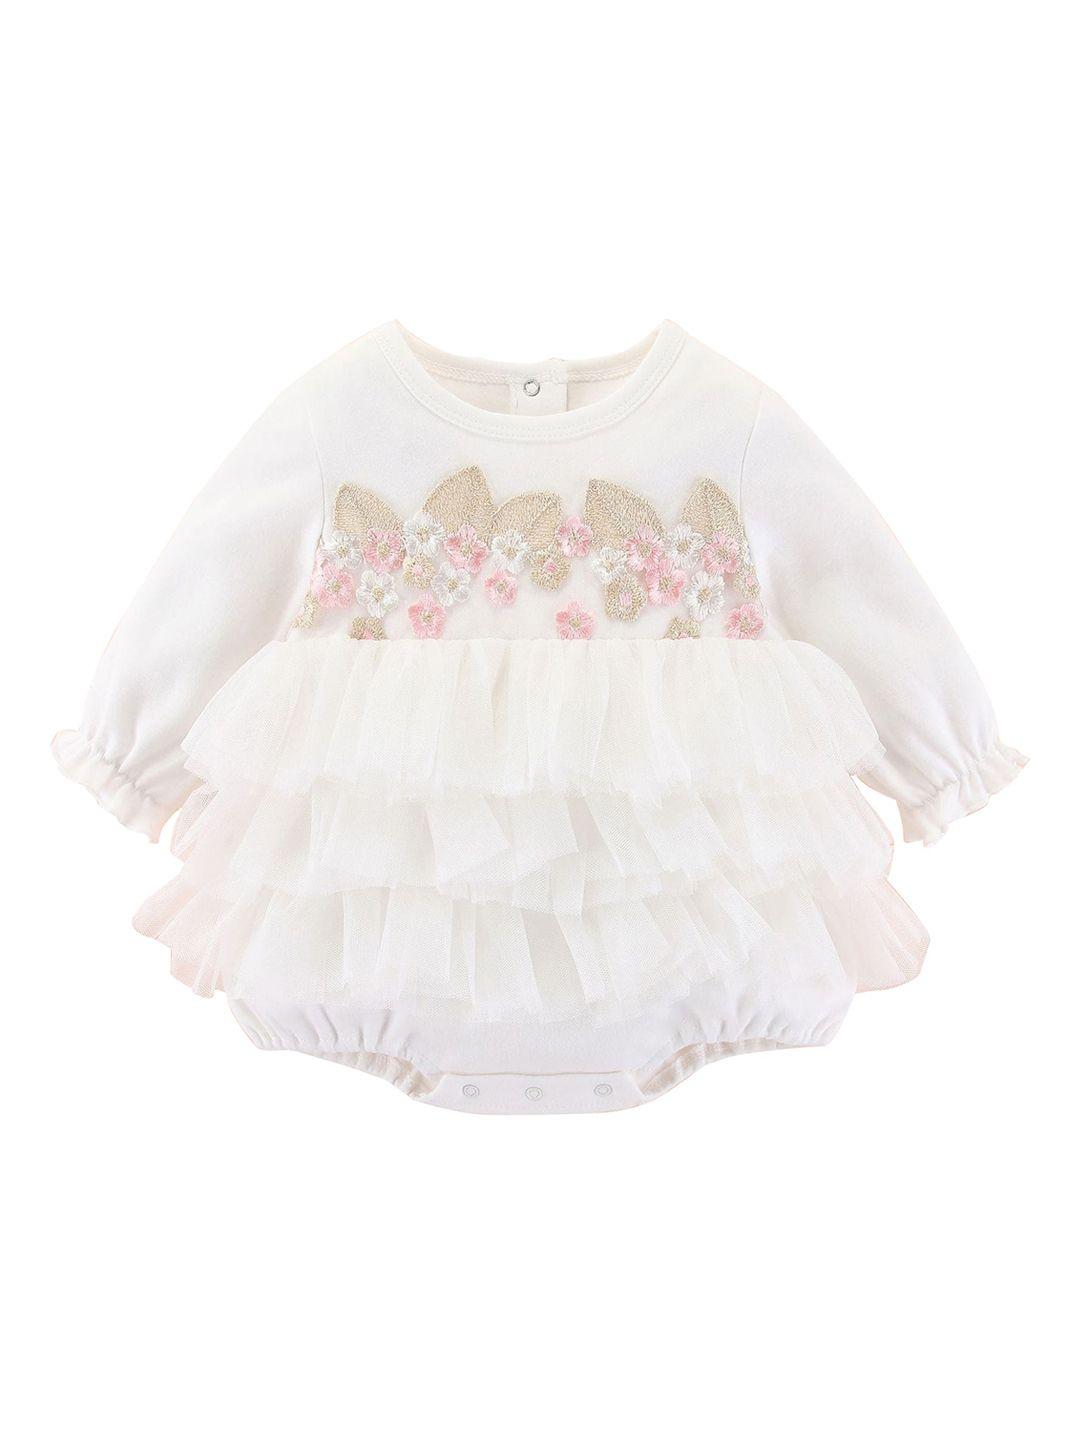 stylecast-infant-girls-cotton-rompers